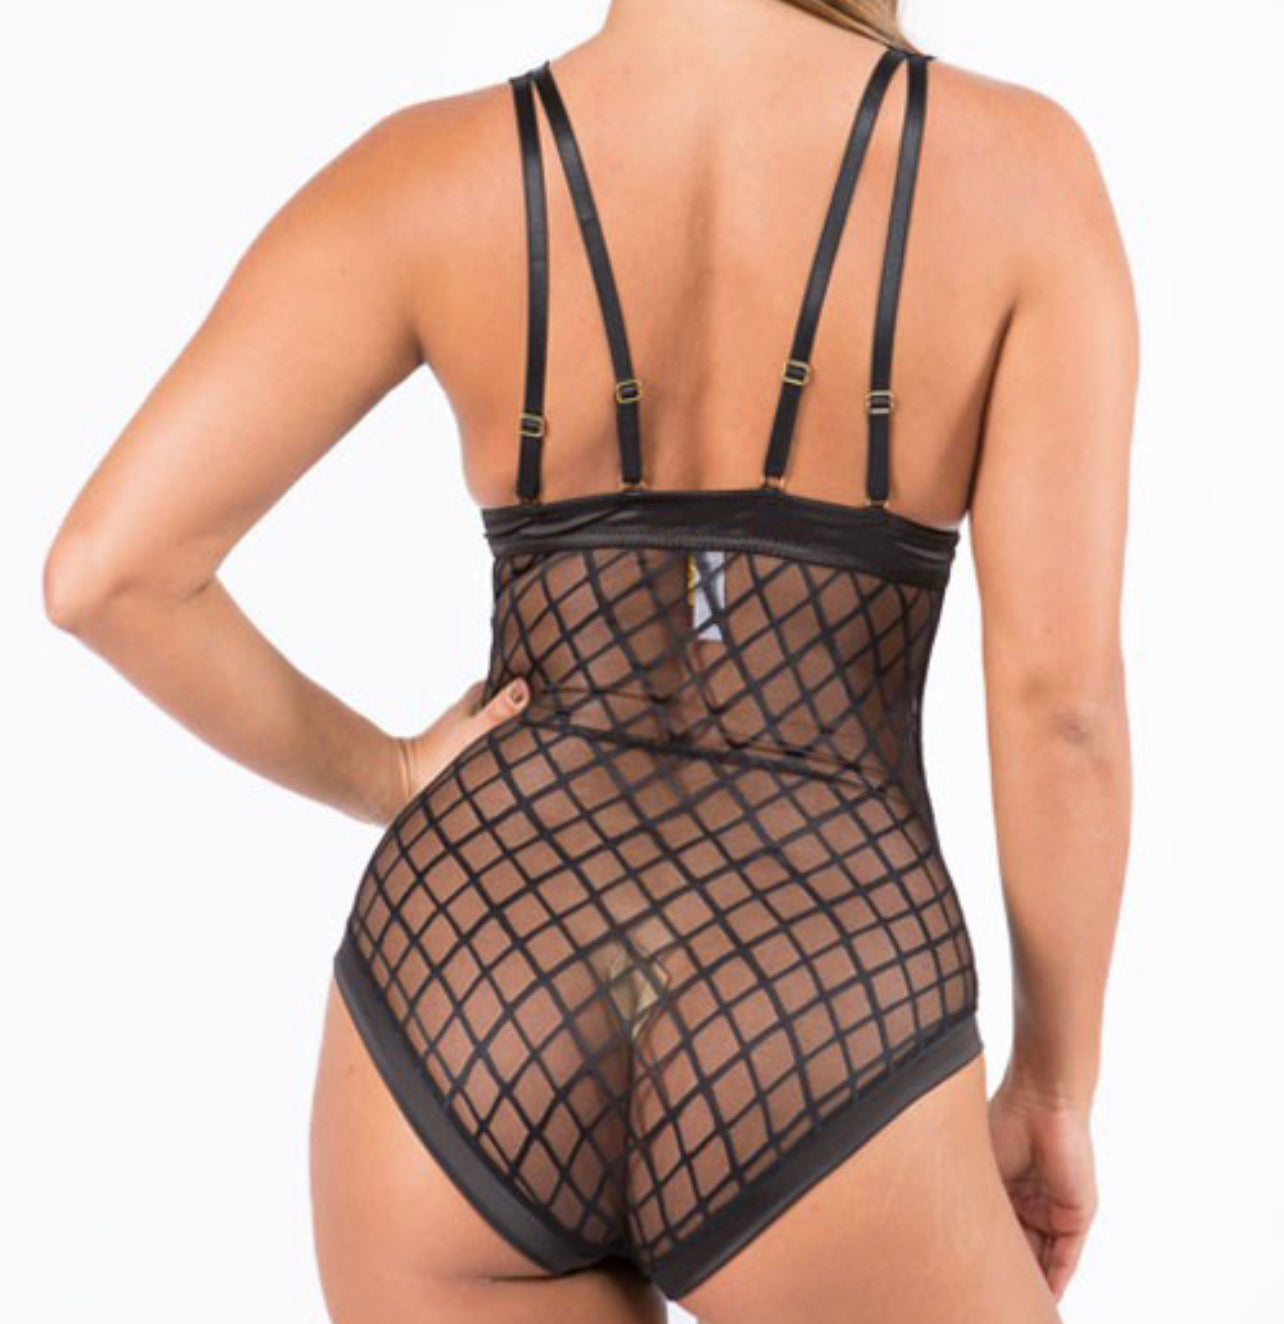 The Netted Bodysuit